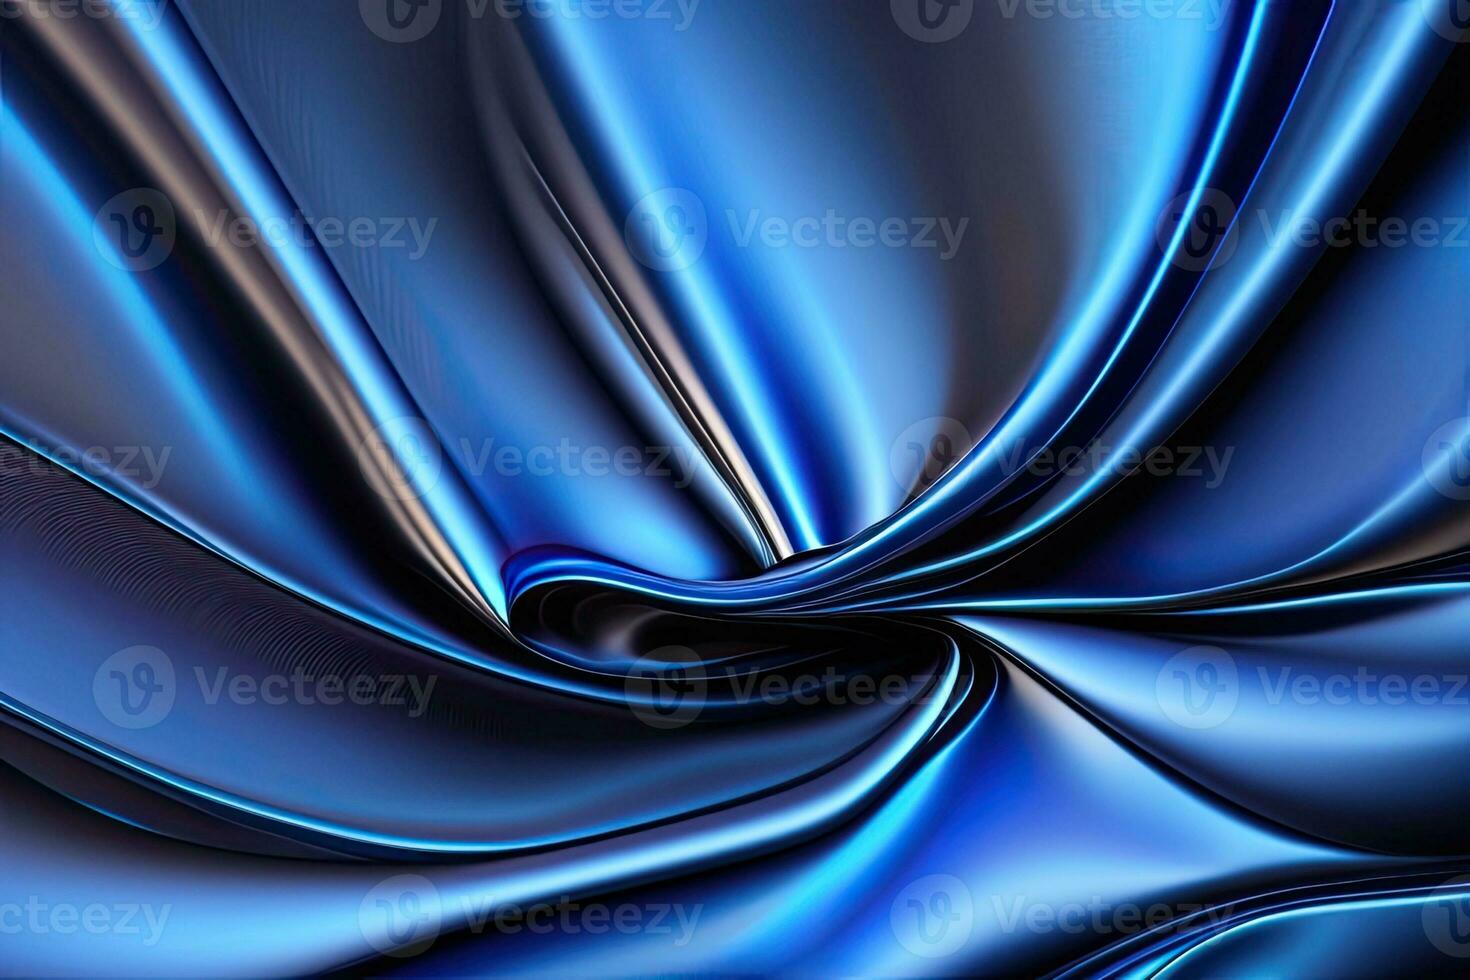 Blue Abstract Background Fabric Surface photo